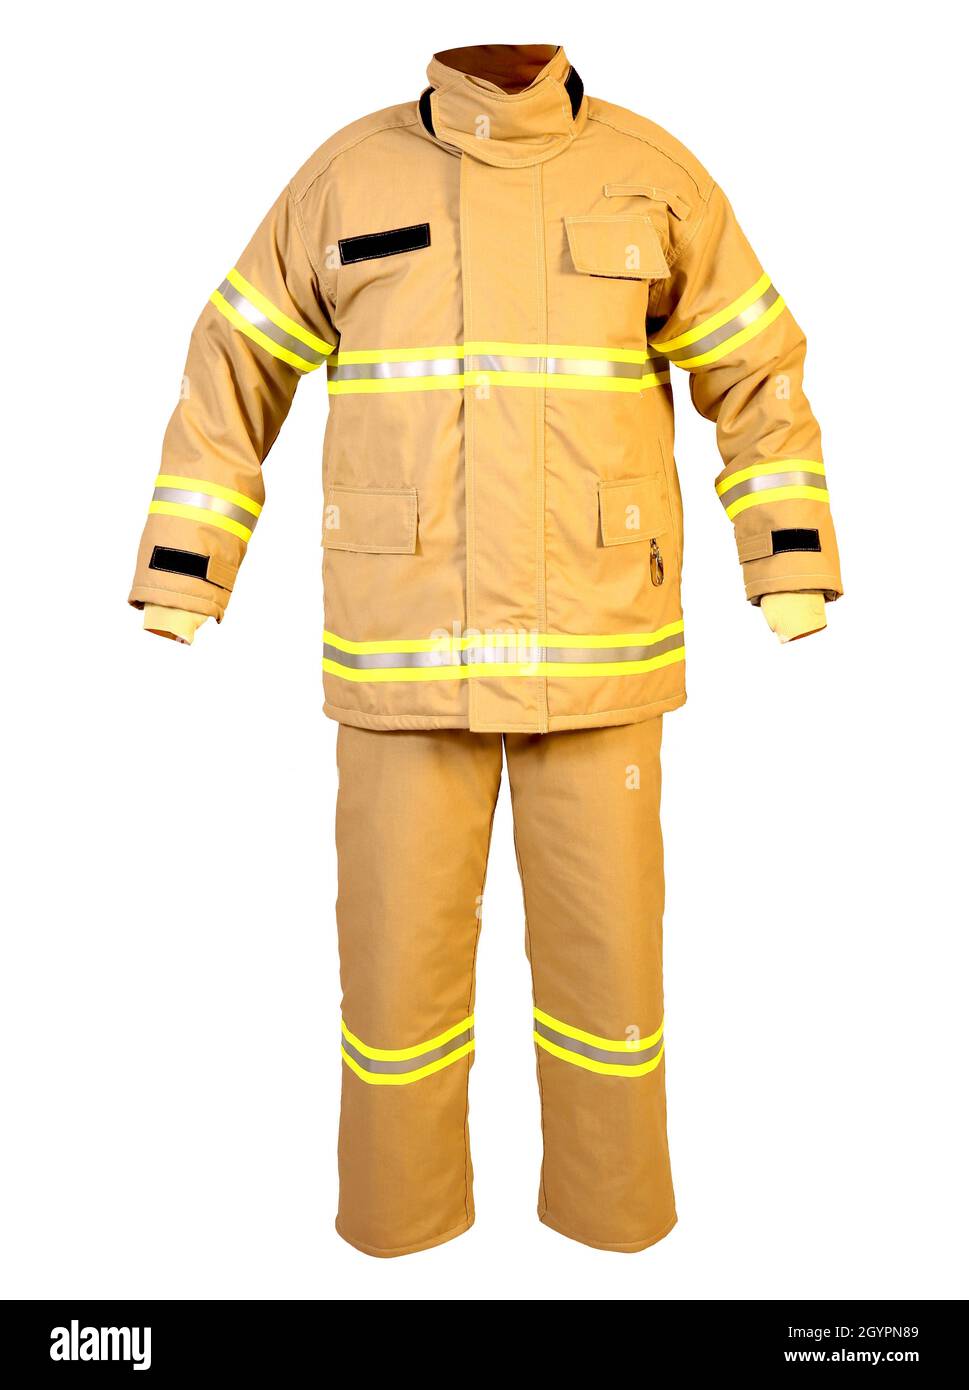 Anti-heat and fire-resistant clothing used by firefighters Stock Photo